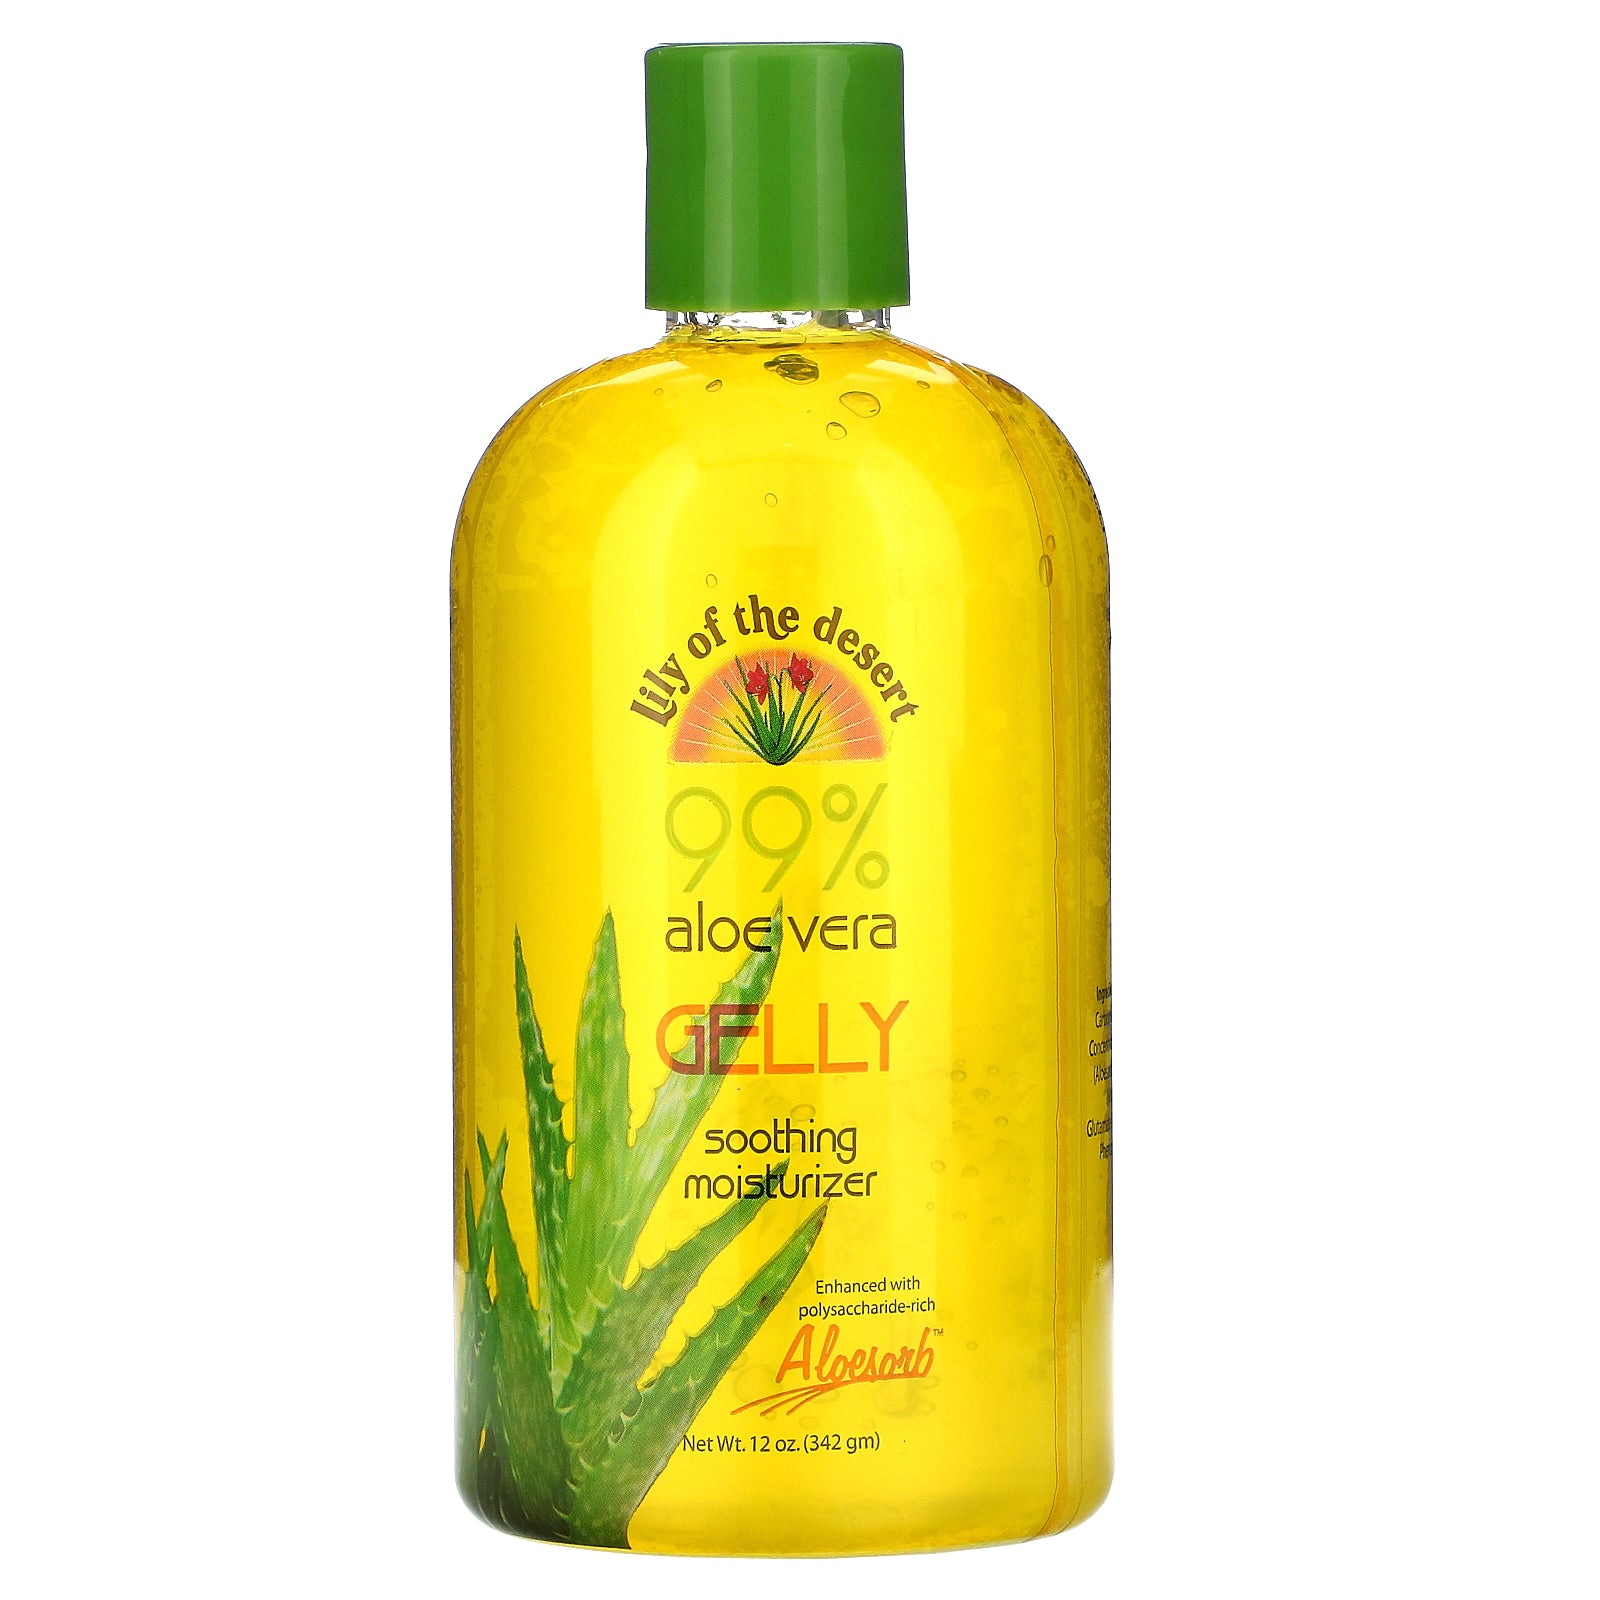 Lily of the Desert 99% Aloe Vera Gelly 342g (Discontinued: Replaced with 454g)